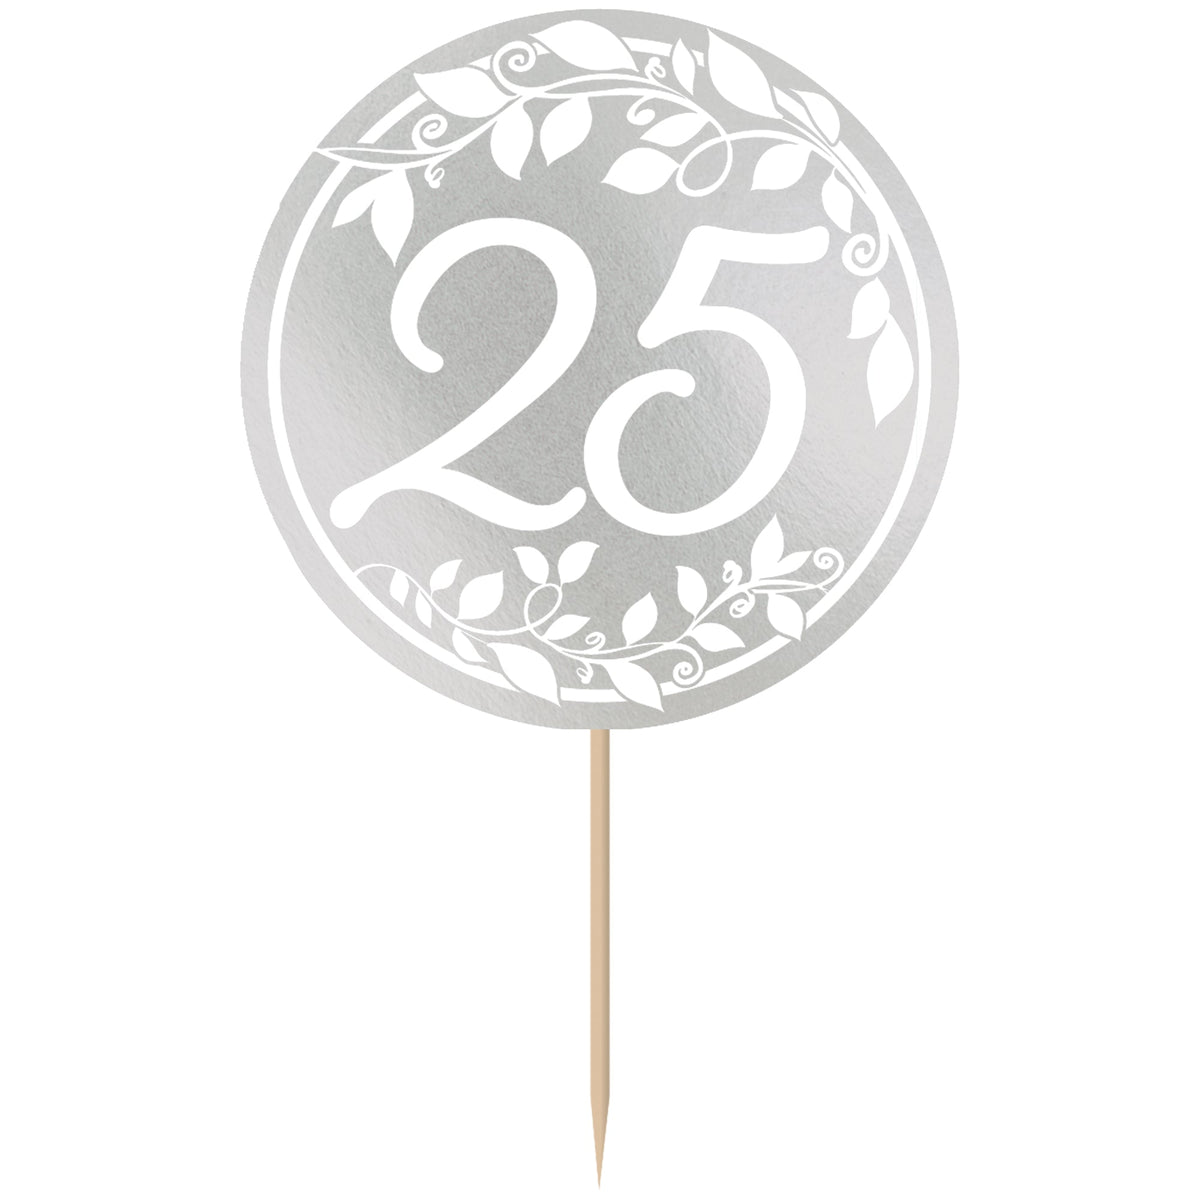 25th Anniversary Silver 3 3/4" Party Picks Package of 24